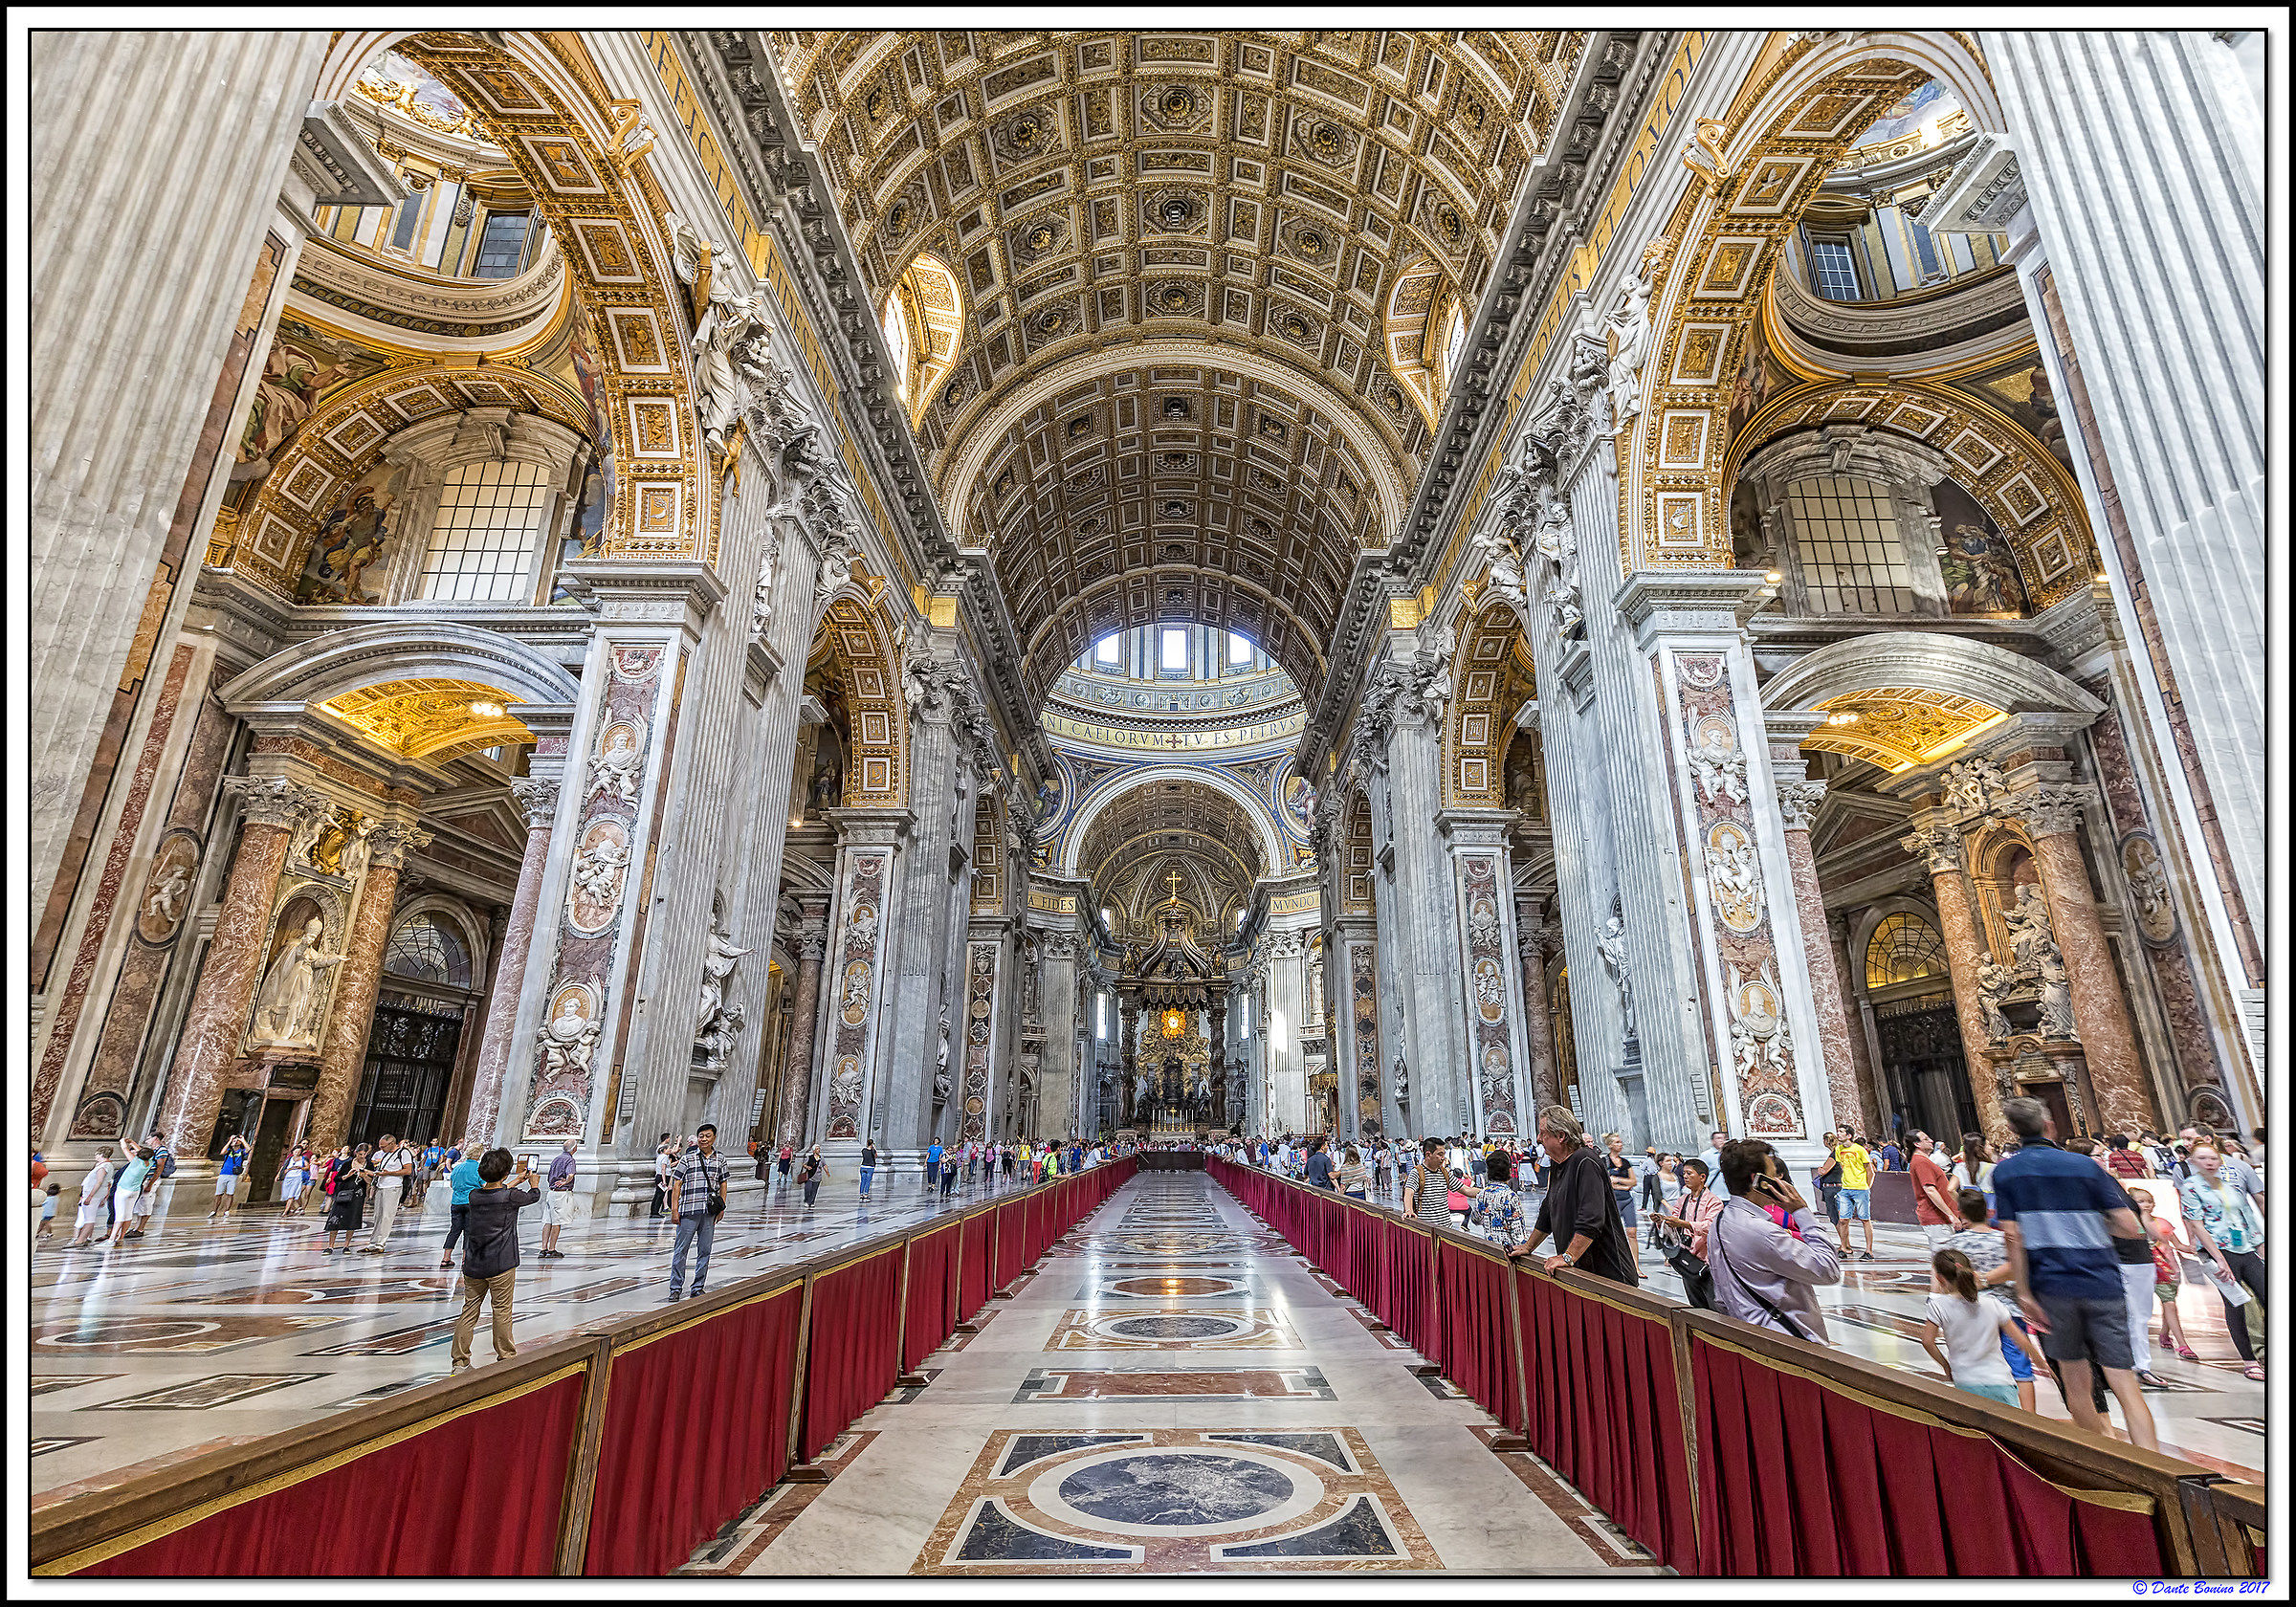 St. Peter's Basilica - Central Nave...